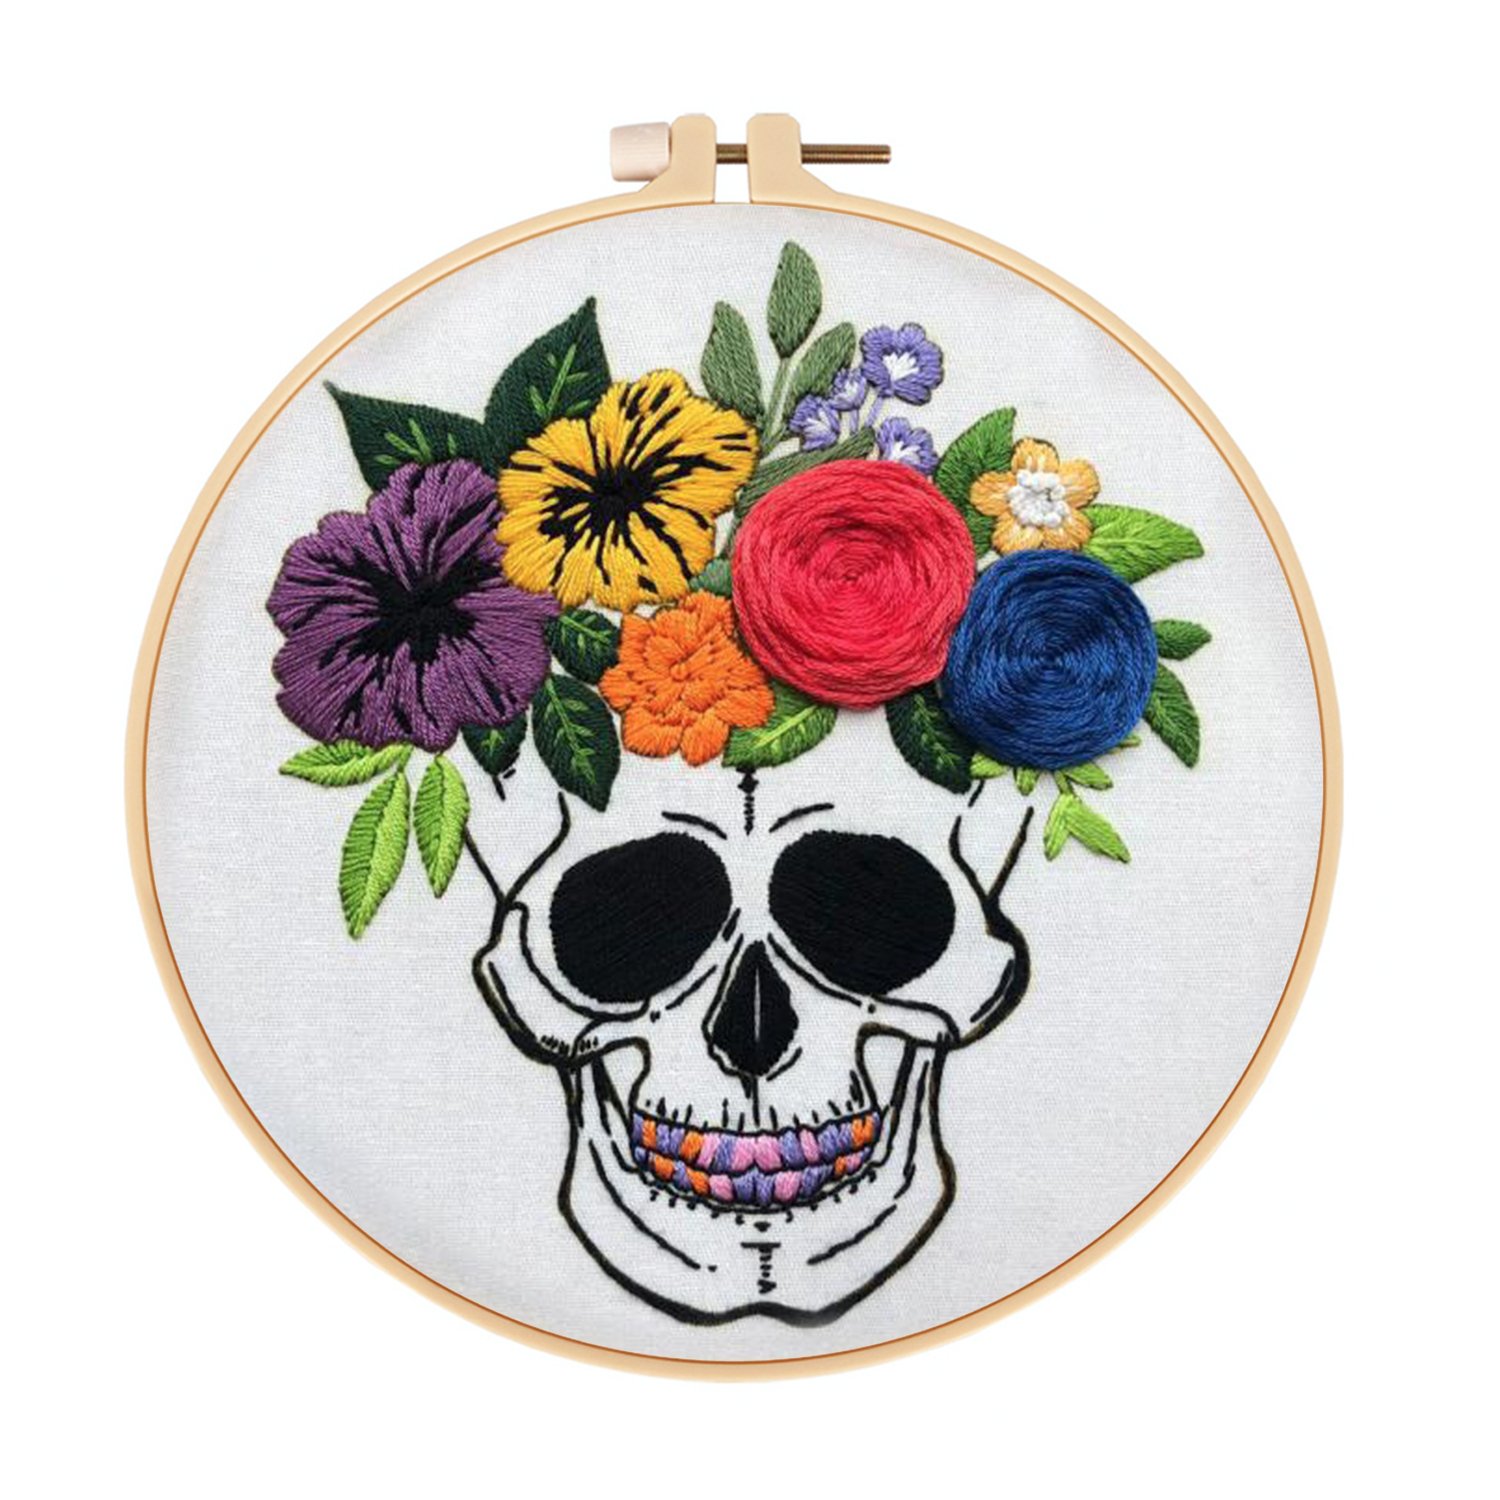 DIY Handmade Embroidery  Cross stitch kit for Adult Beginner- Skull with Flowers Pattern